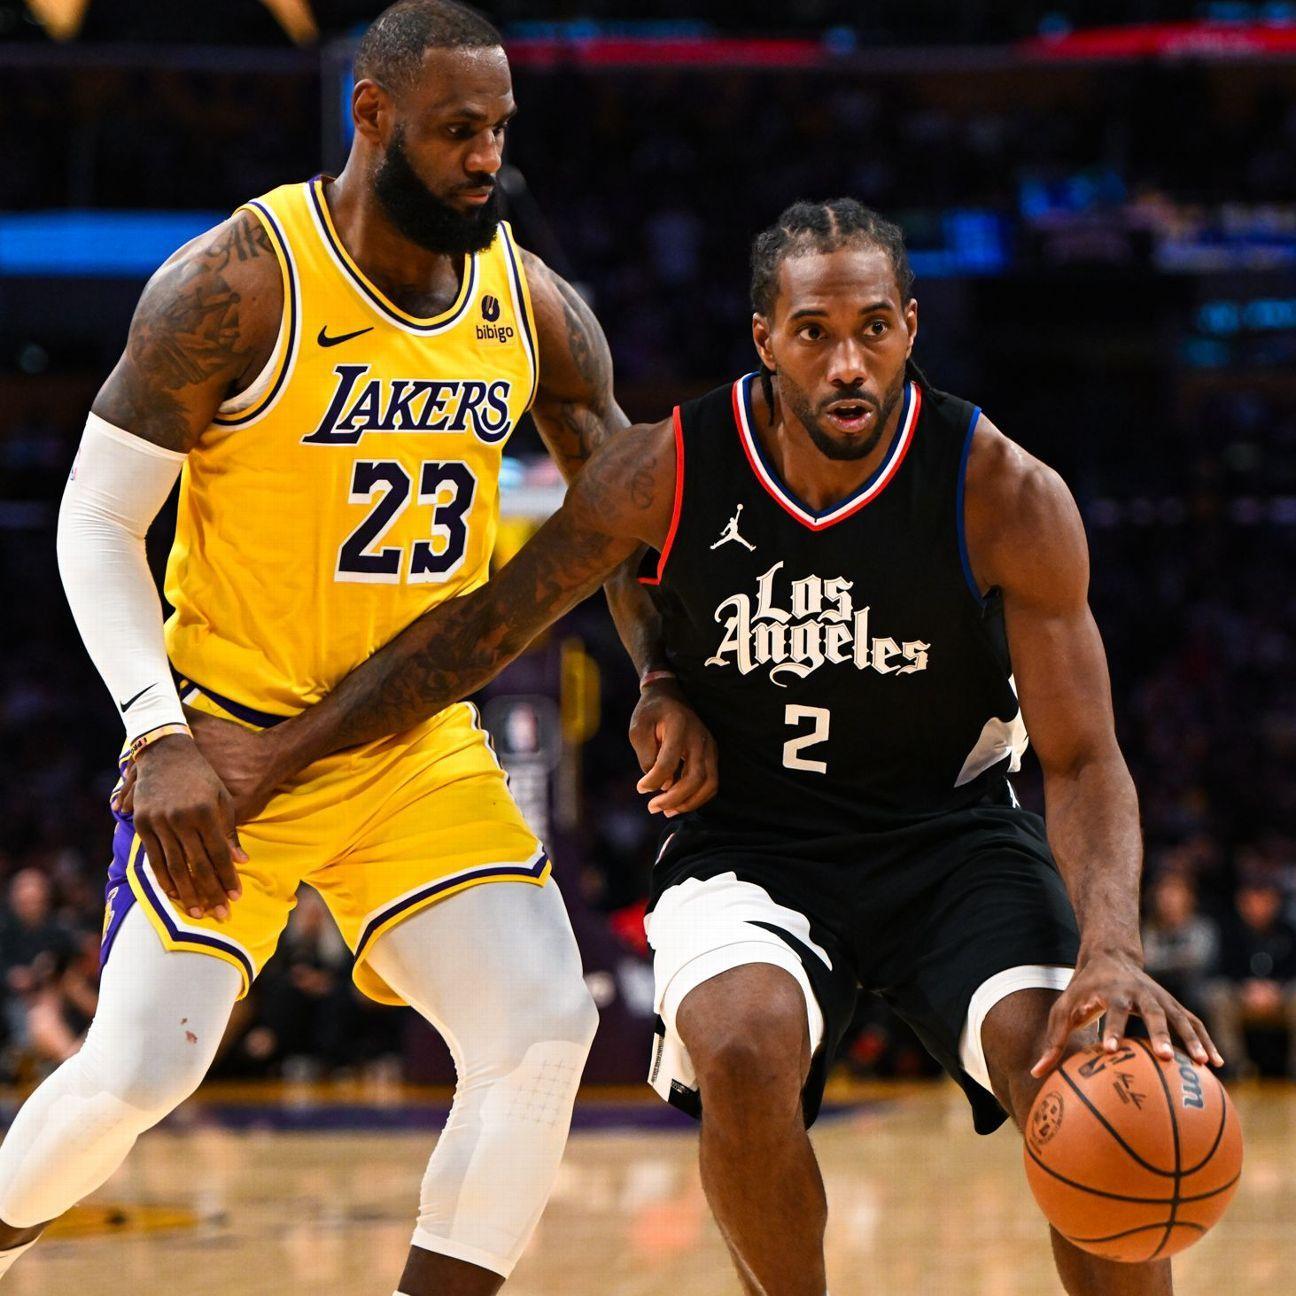 LeBron, Lakers drop 4th straight: 'We just suck right now'